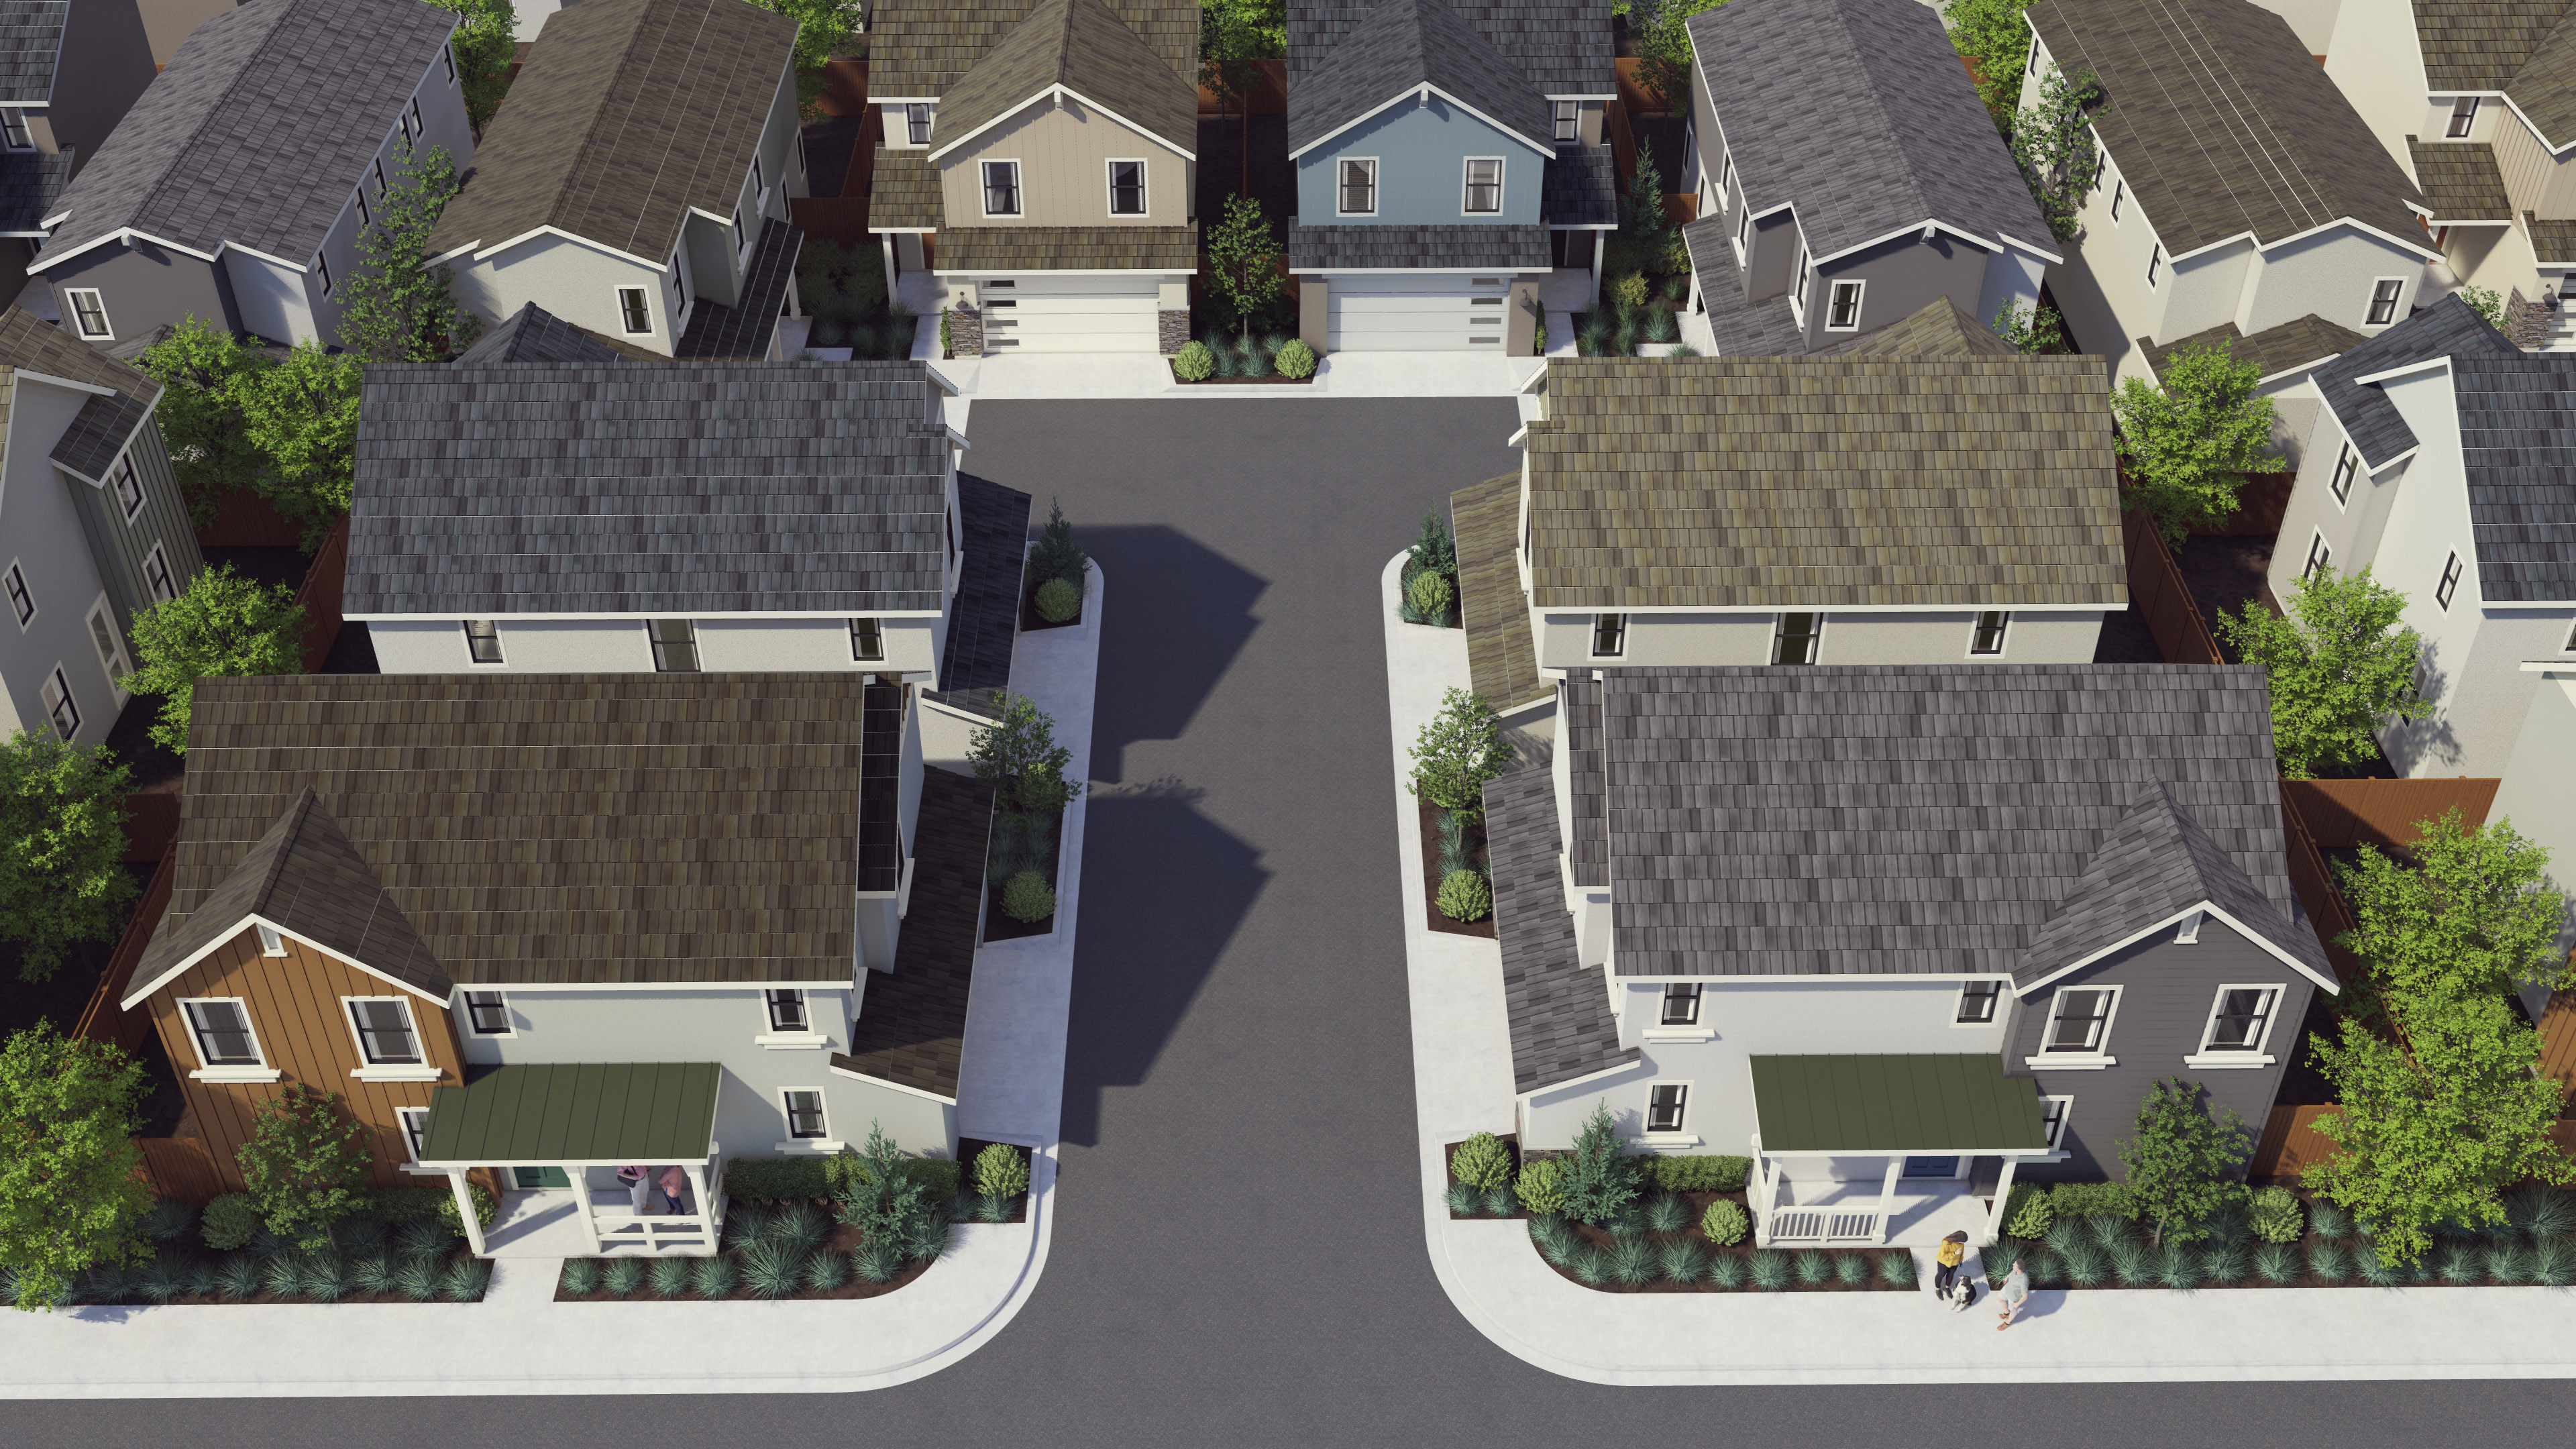 Aerial rendering of community with gray, brown and beige roofs and landscaping